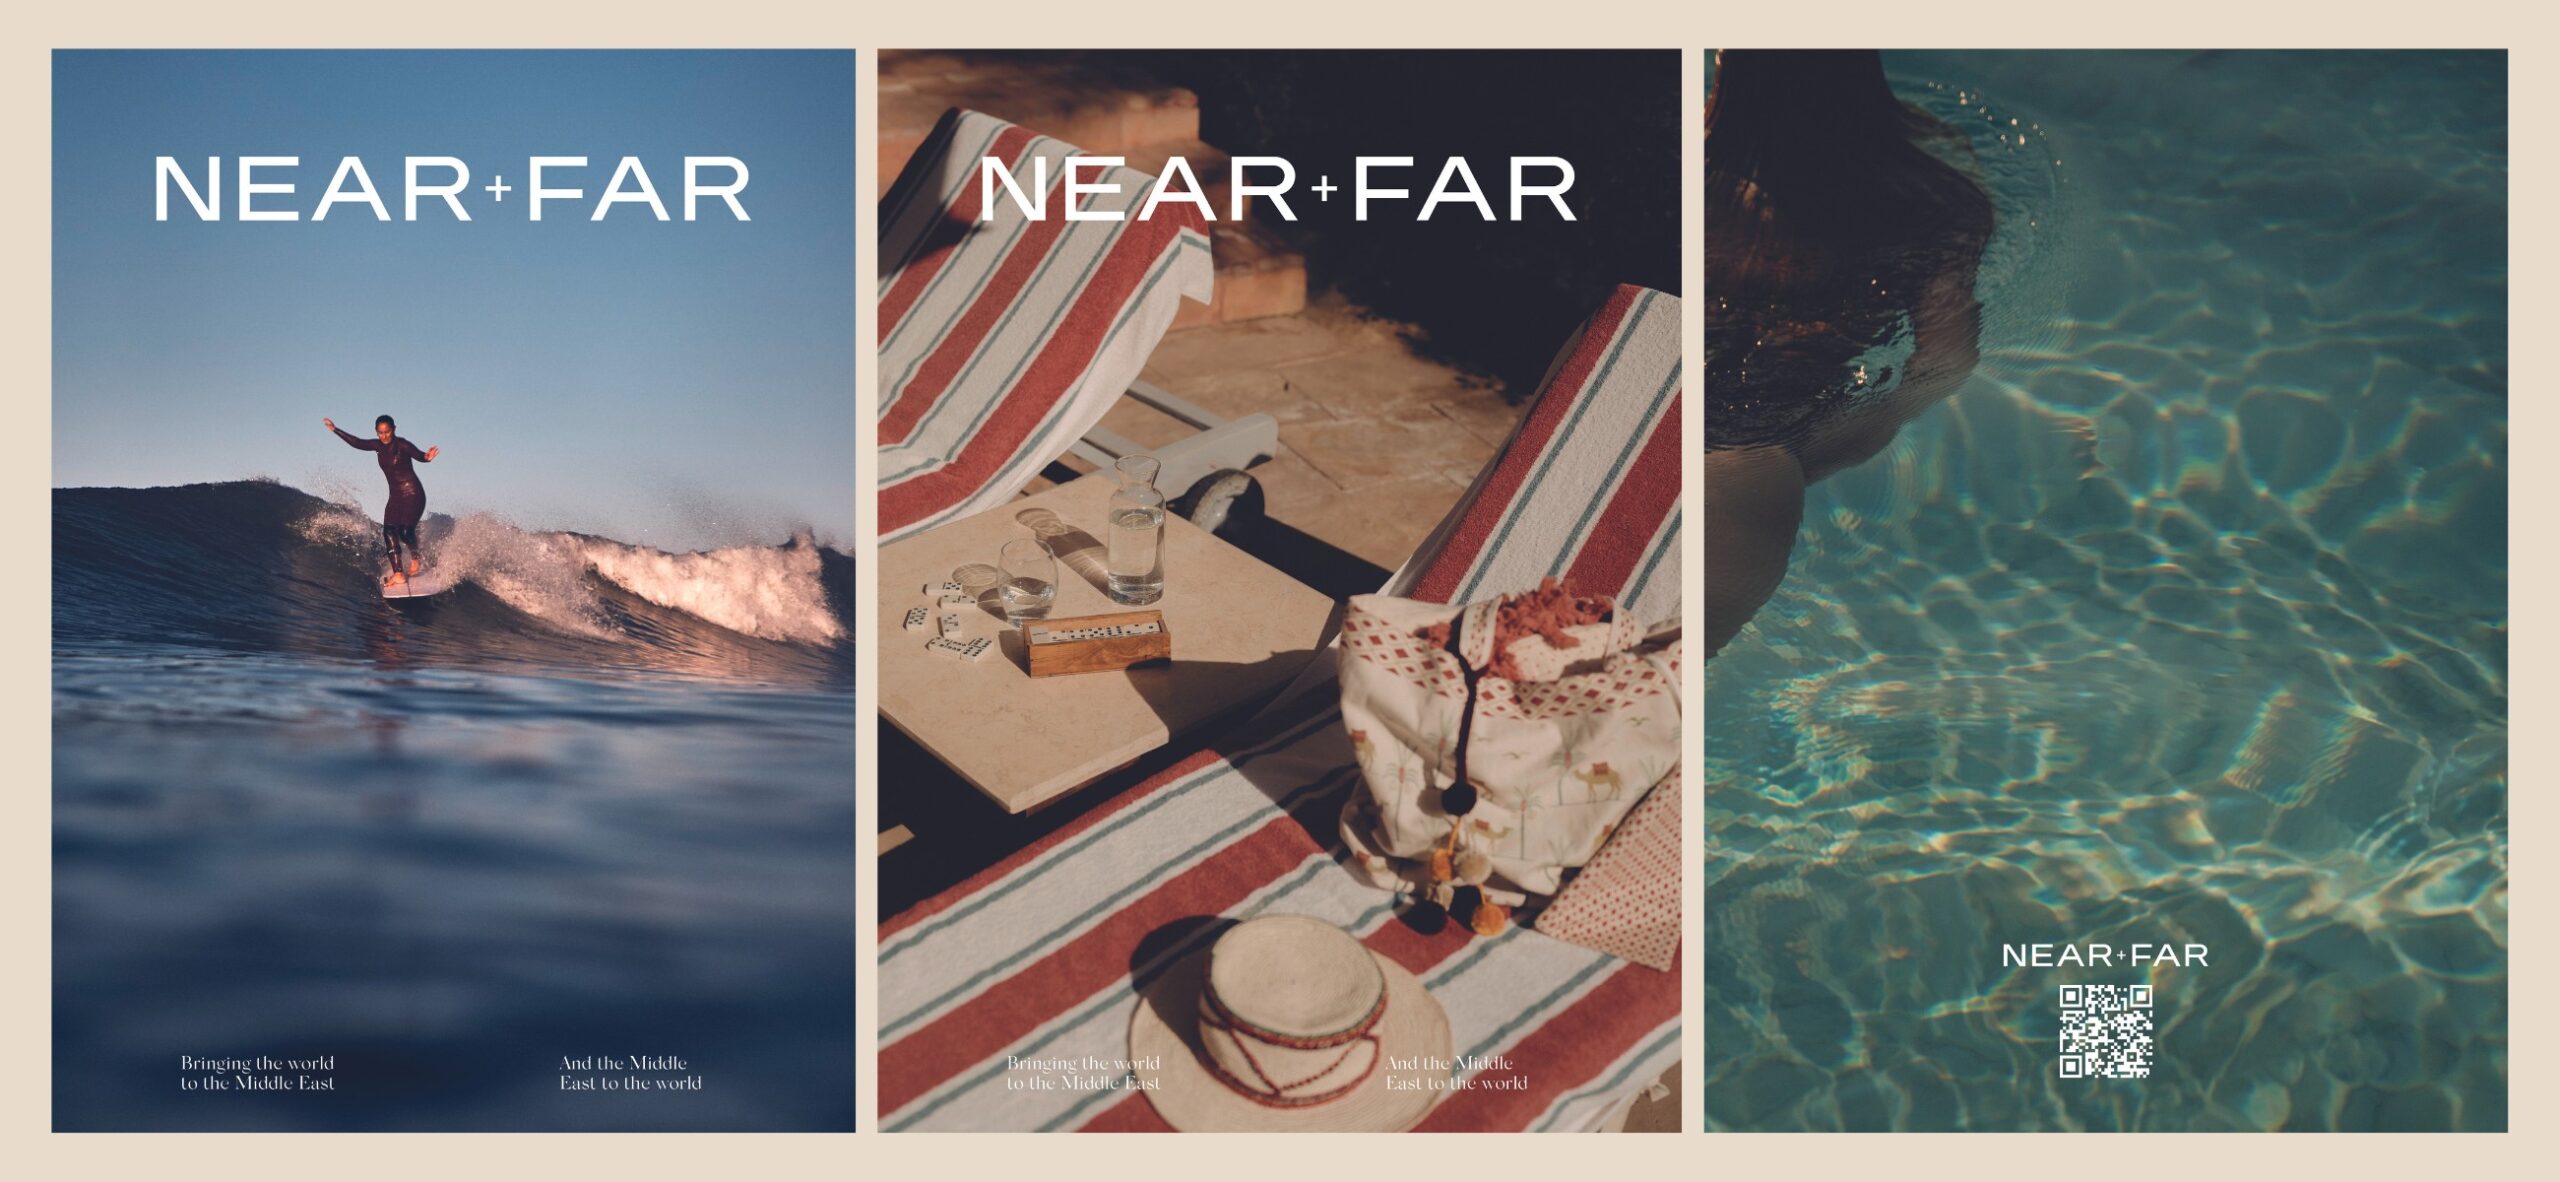 Near+Far magazine issue one: covers